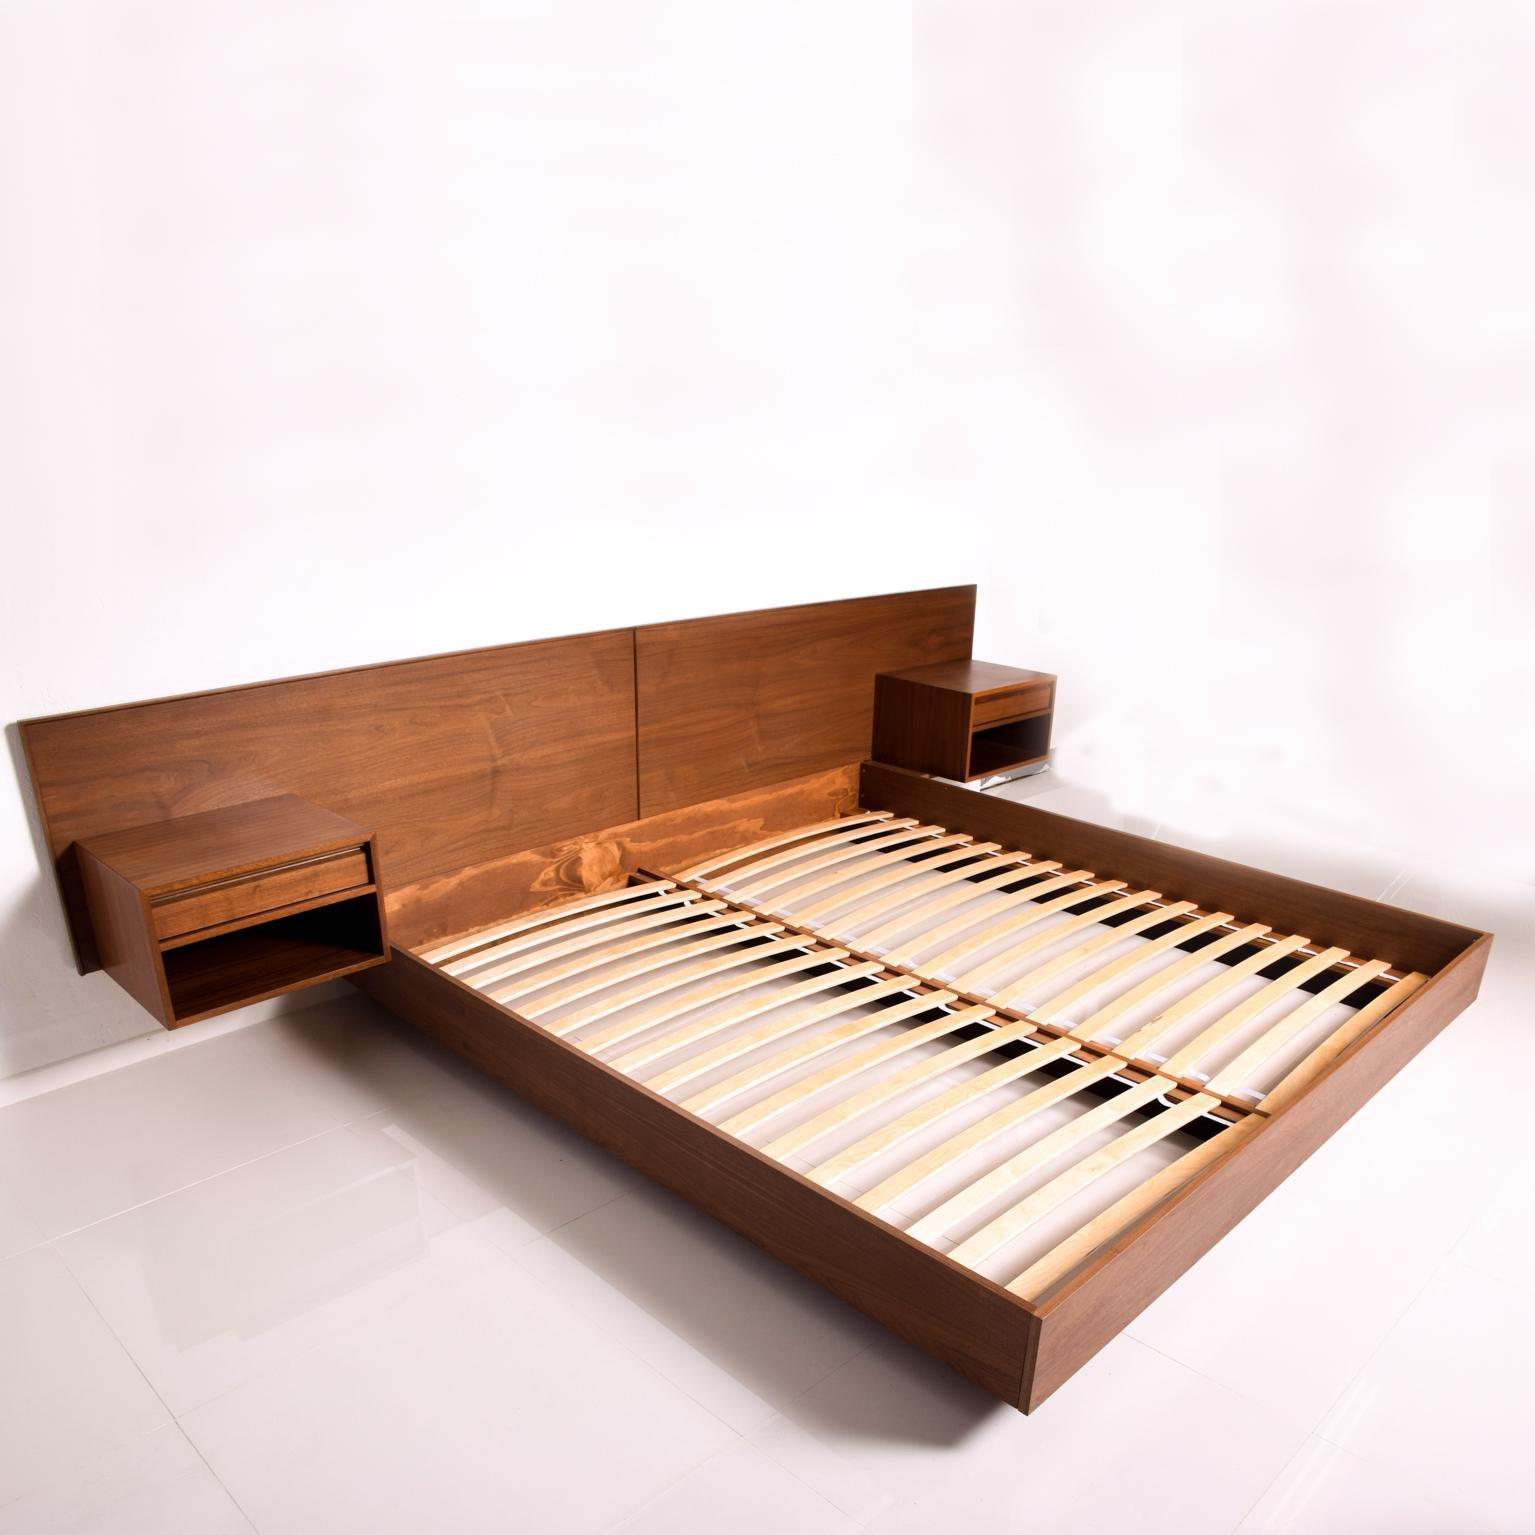 For your consideration a Mid Century Modern Platform Bed King Size in Walnut Wood with Floating Nightstands.Designed by Pablo Romo for Ambianic.
Reference # BEDGM1217192
Amazing Clean Modern Lines- Simple and Elegant.
Dimensions are: 125